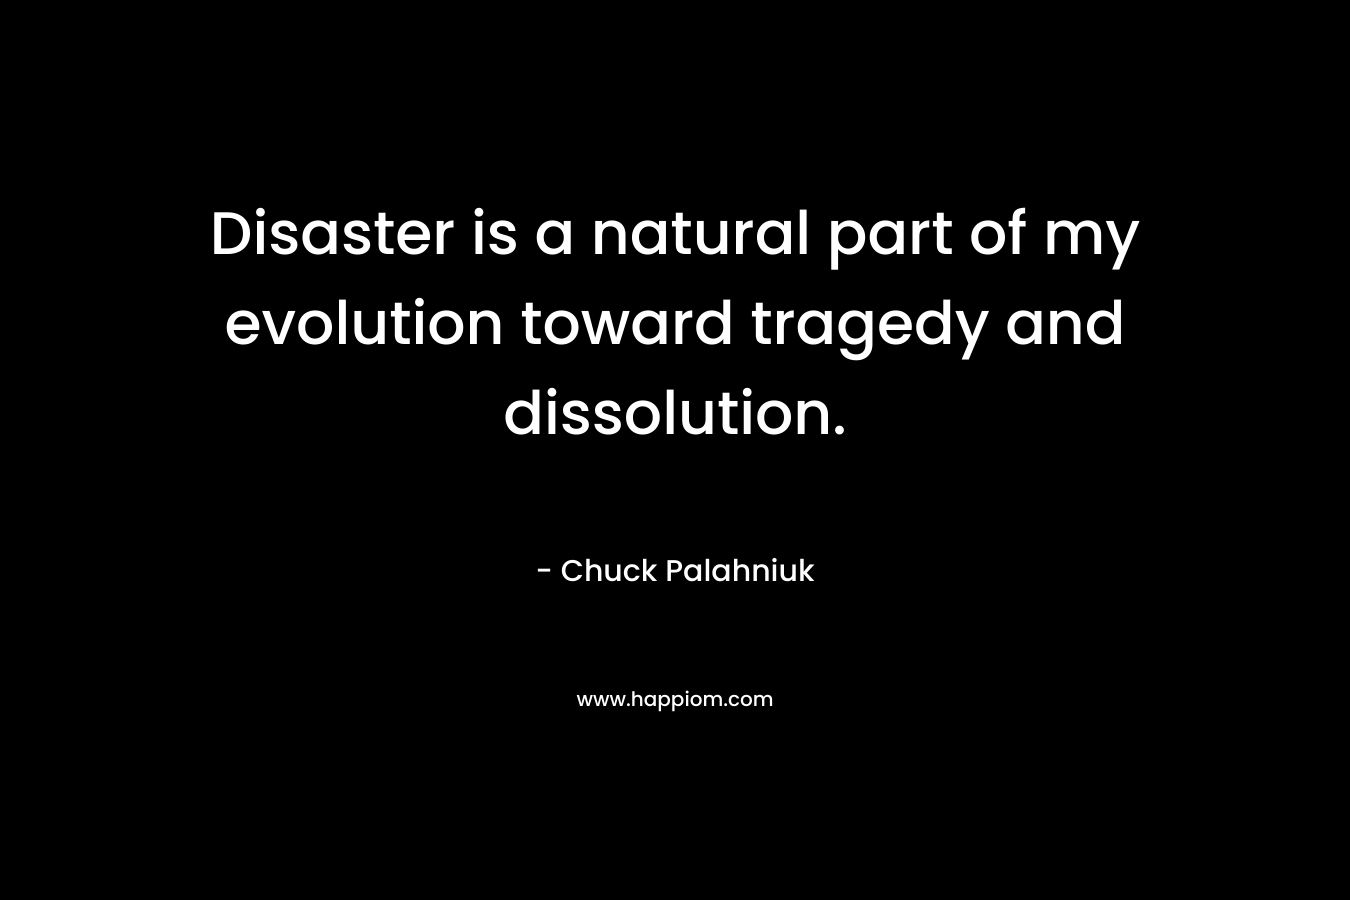 Disaster is a natural part of my evolution toward tragedy and dissolution. – Chuck Palahniuk